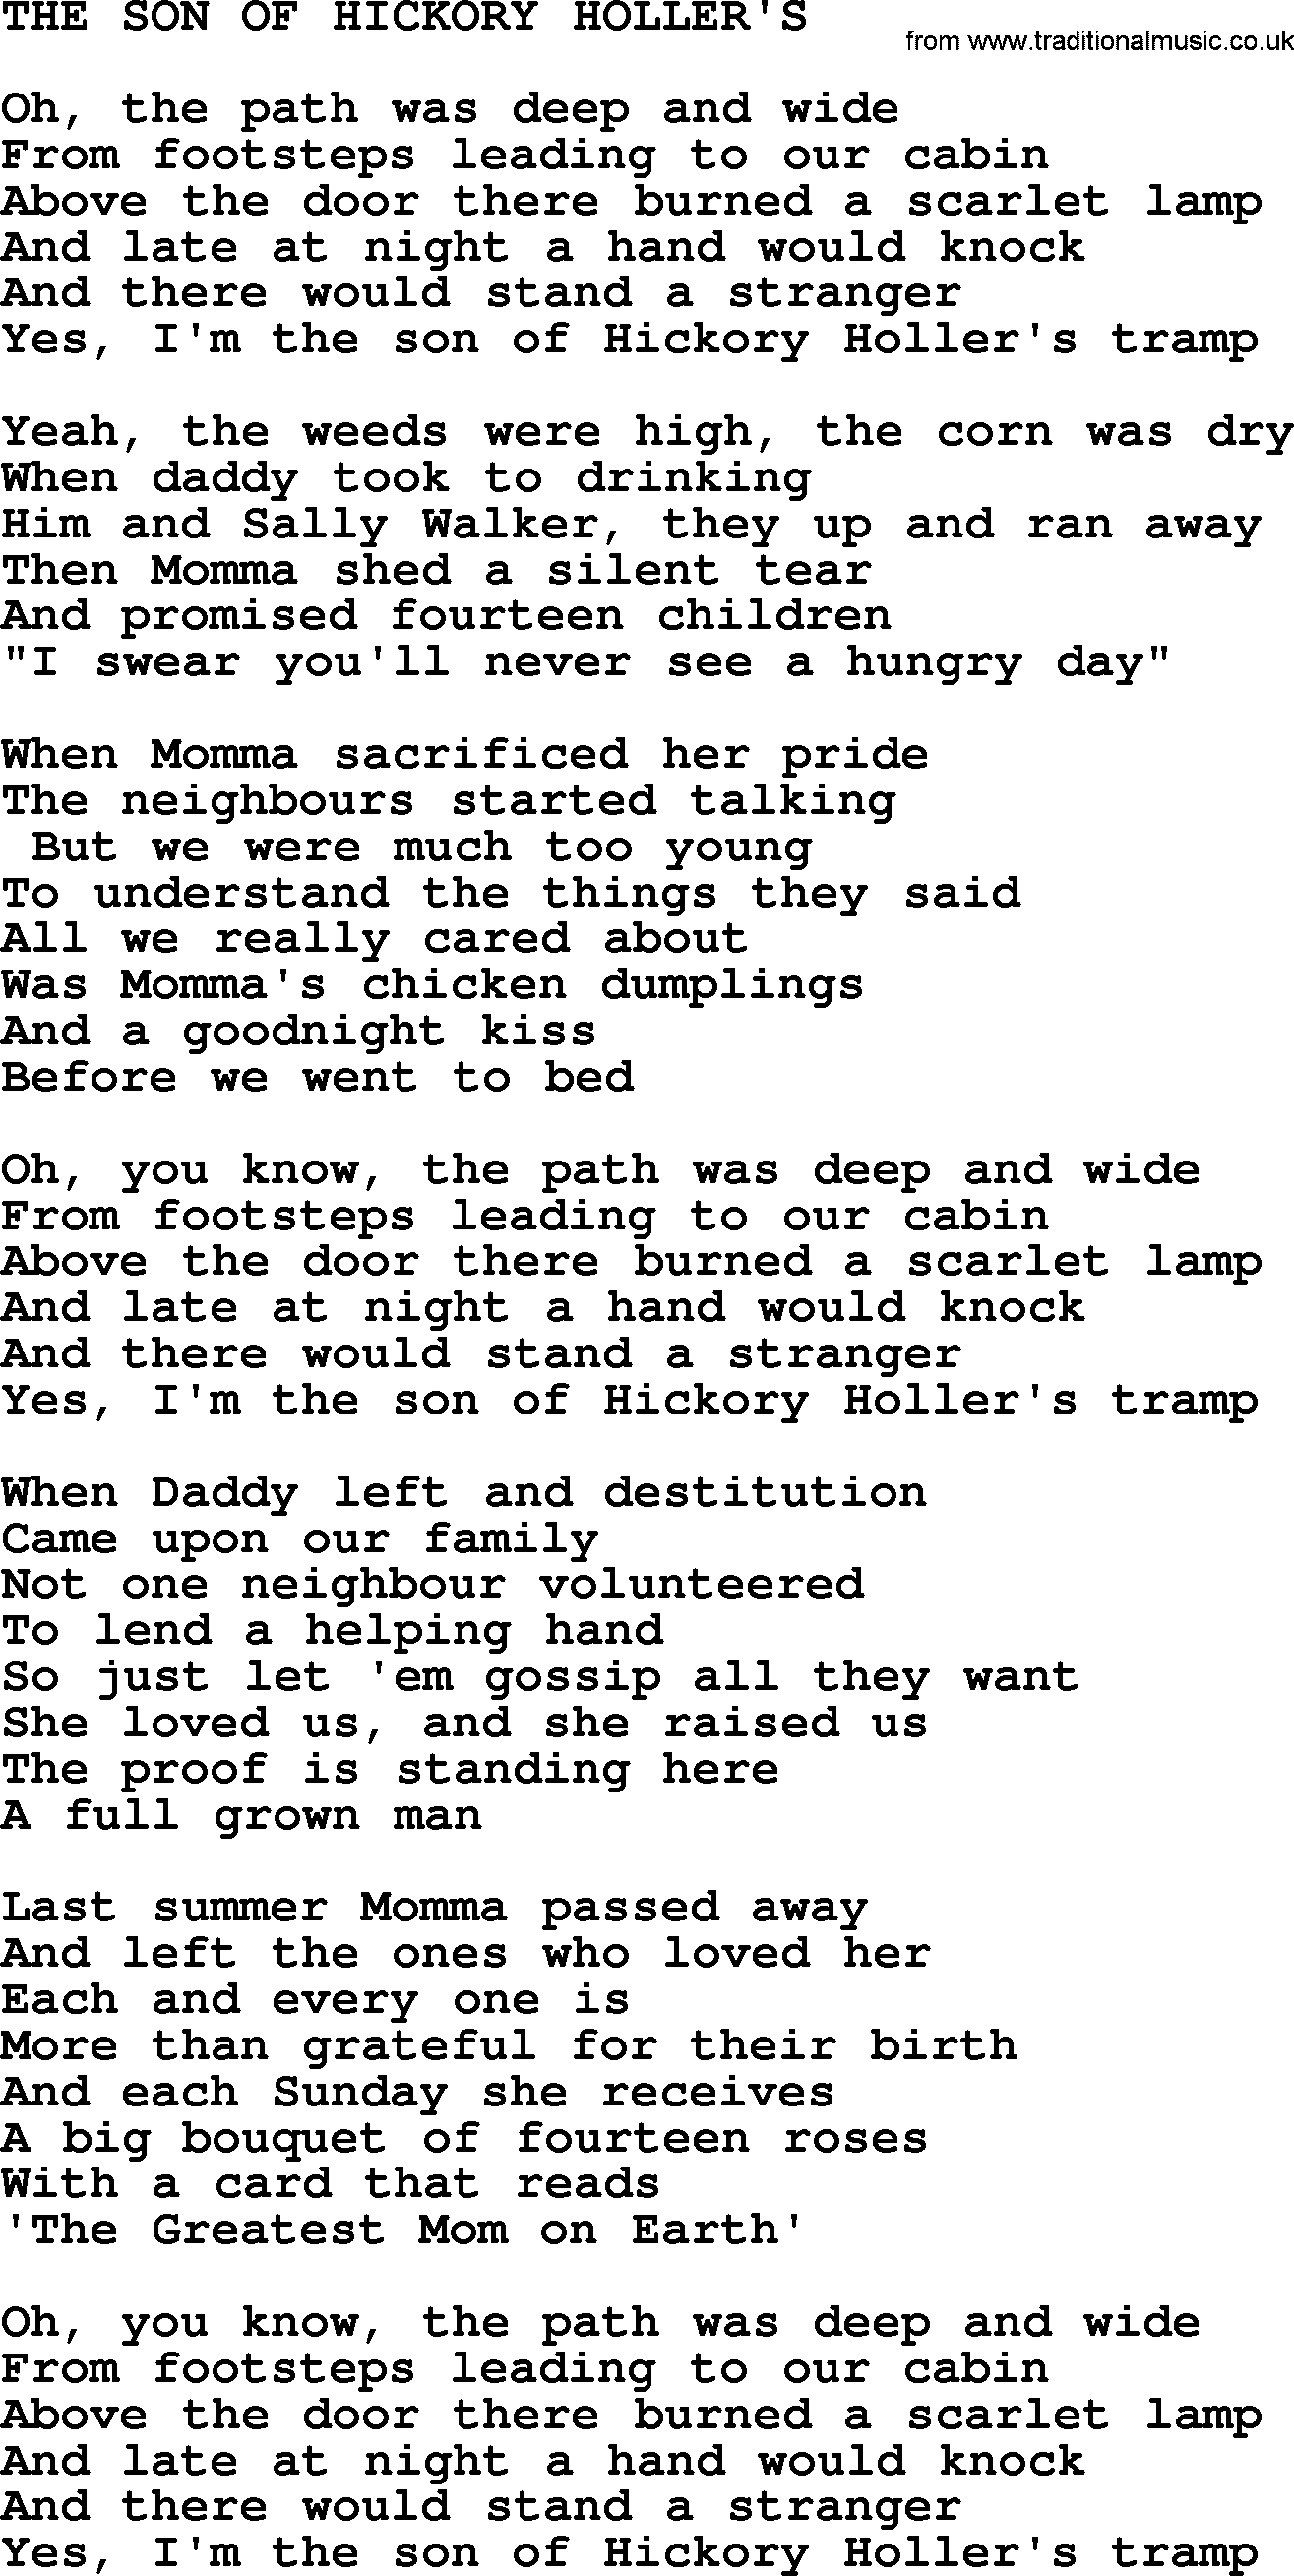 Merle Haggard song: The Son Of Hickory Holler's, lyrics.